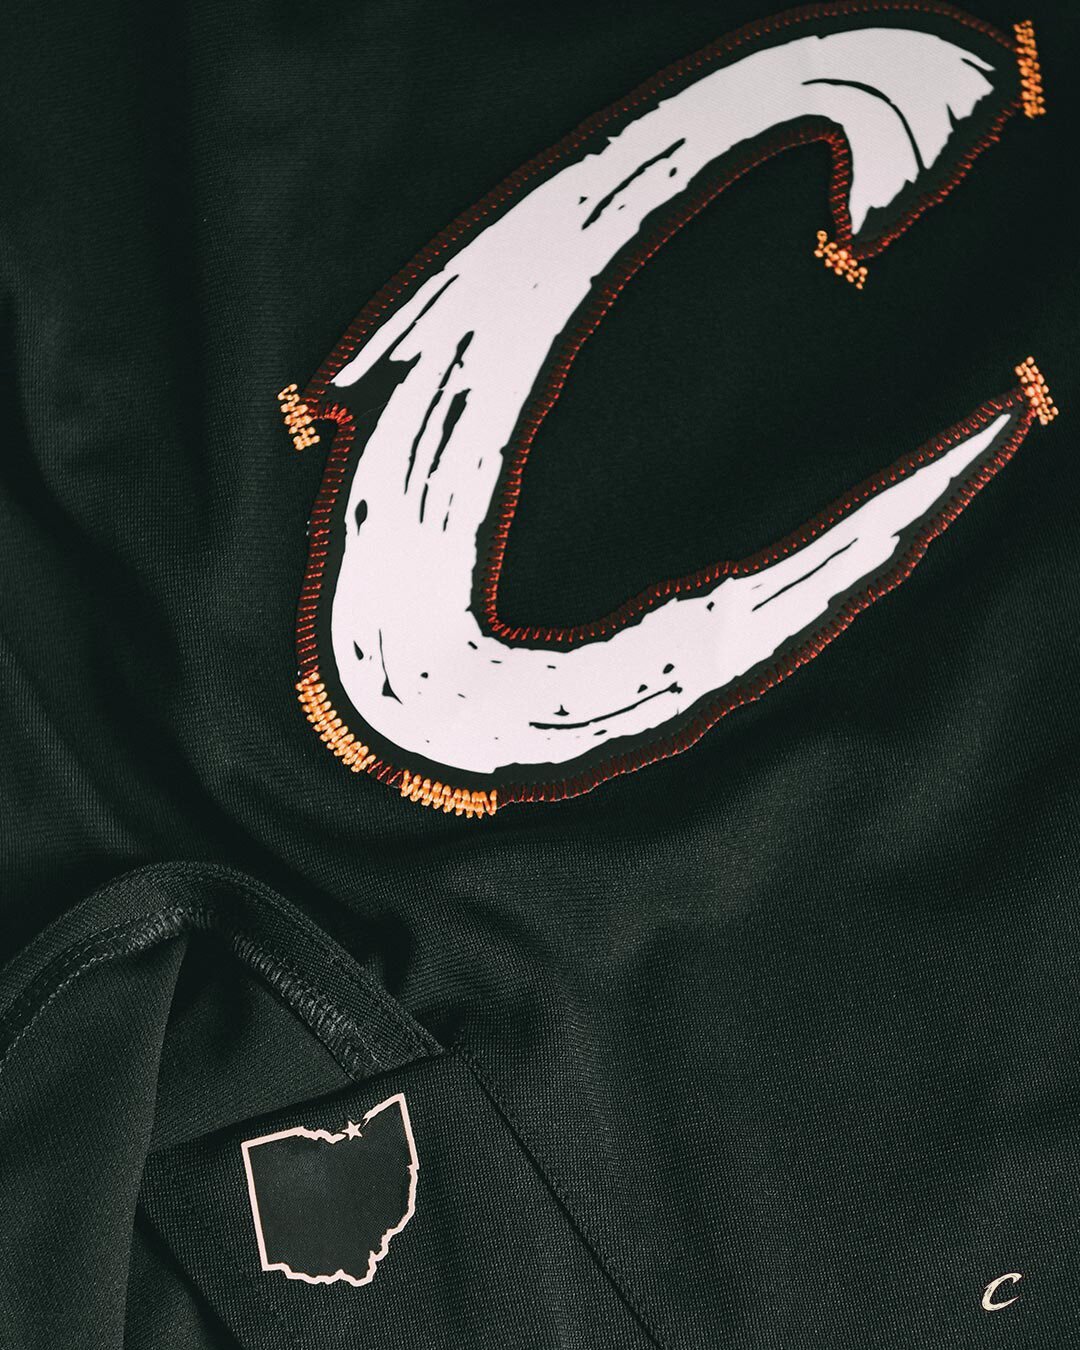 Cleveland Cavaliers' City Edition uniforms celebrate rock and roll roots 